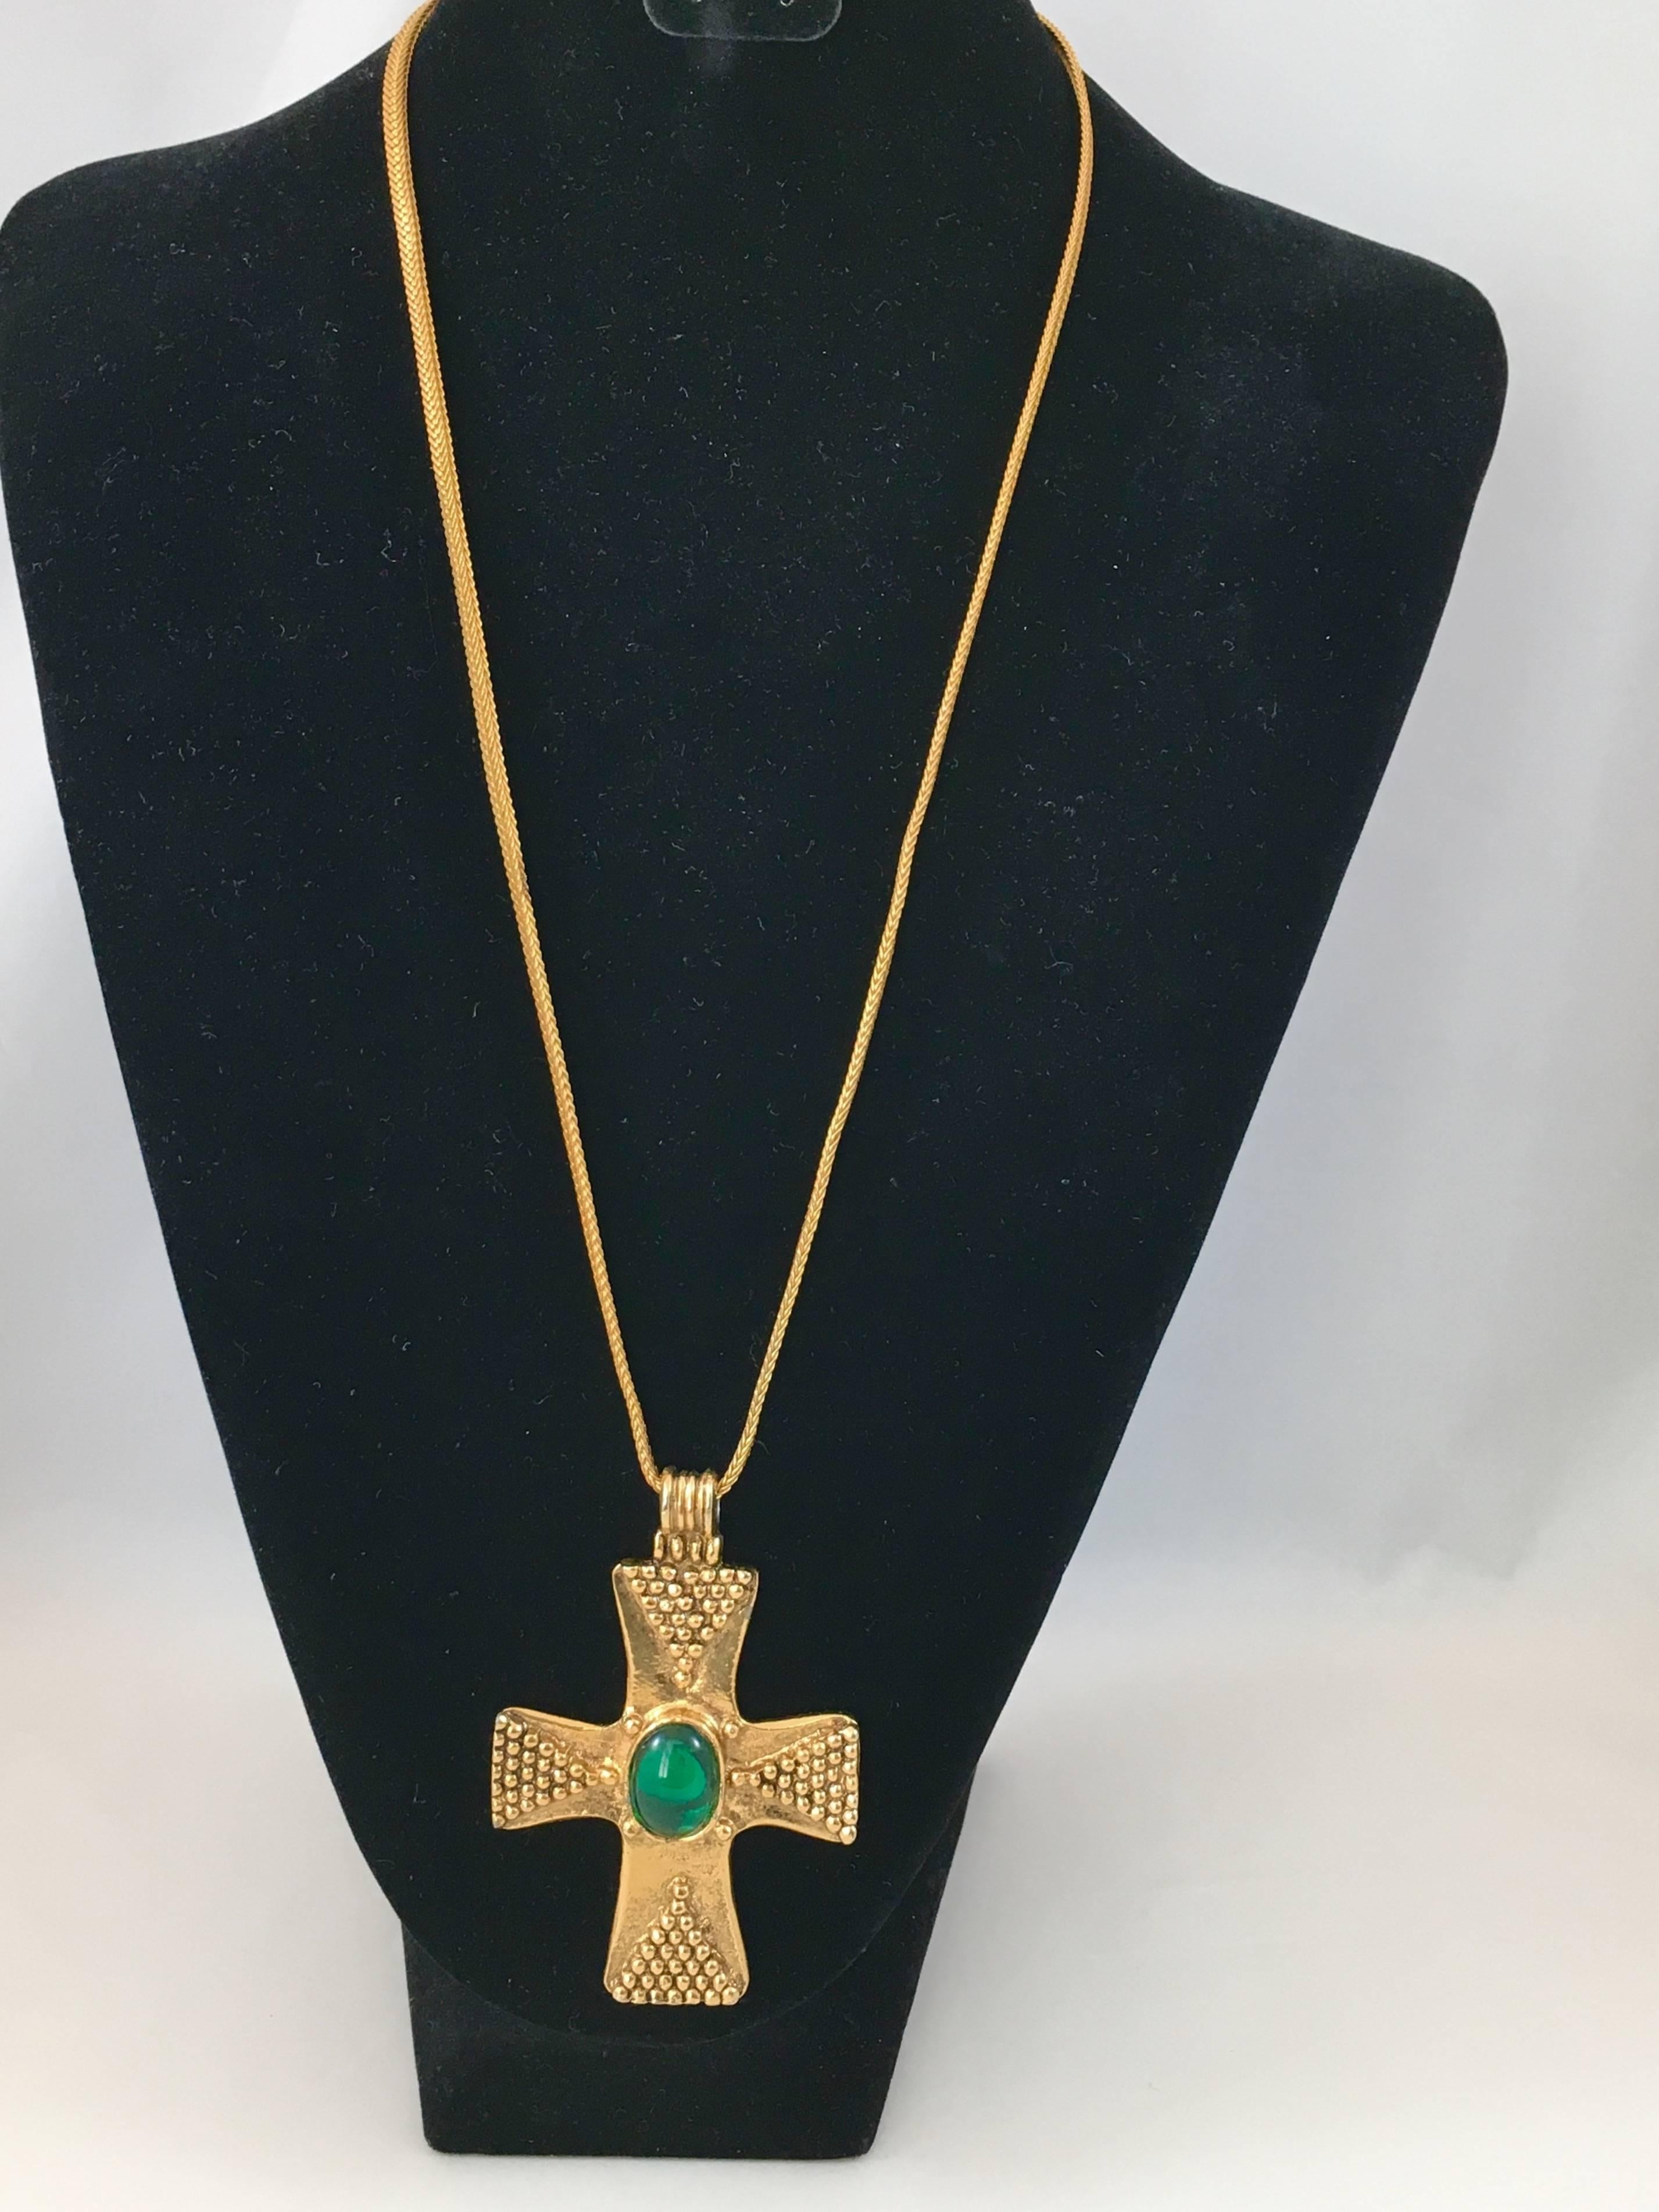 This is a stunning 1970s Yves Saint Laurent cross pendant necklace - so in tune with the Met Show 'Heavenly Bodies'. Overall the necklace measures 16 inches long. This includes the pendant which is 3 1/4 inches long x 2 1/8 inches wide. The cross is